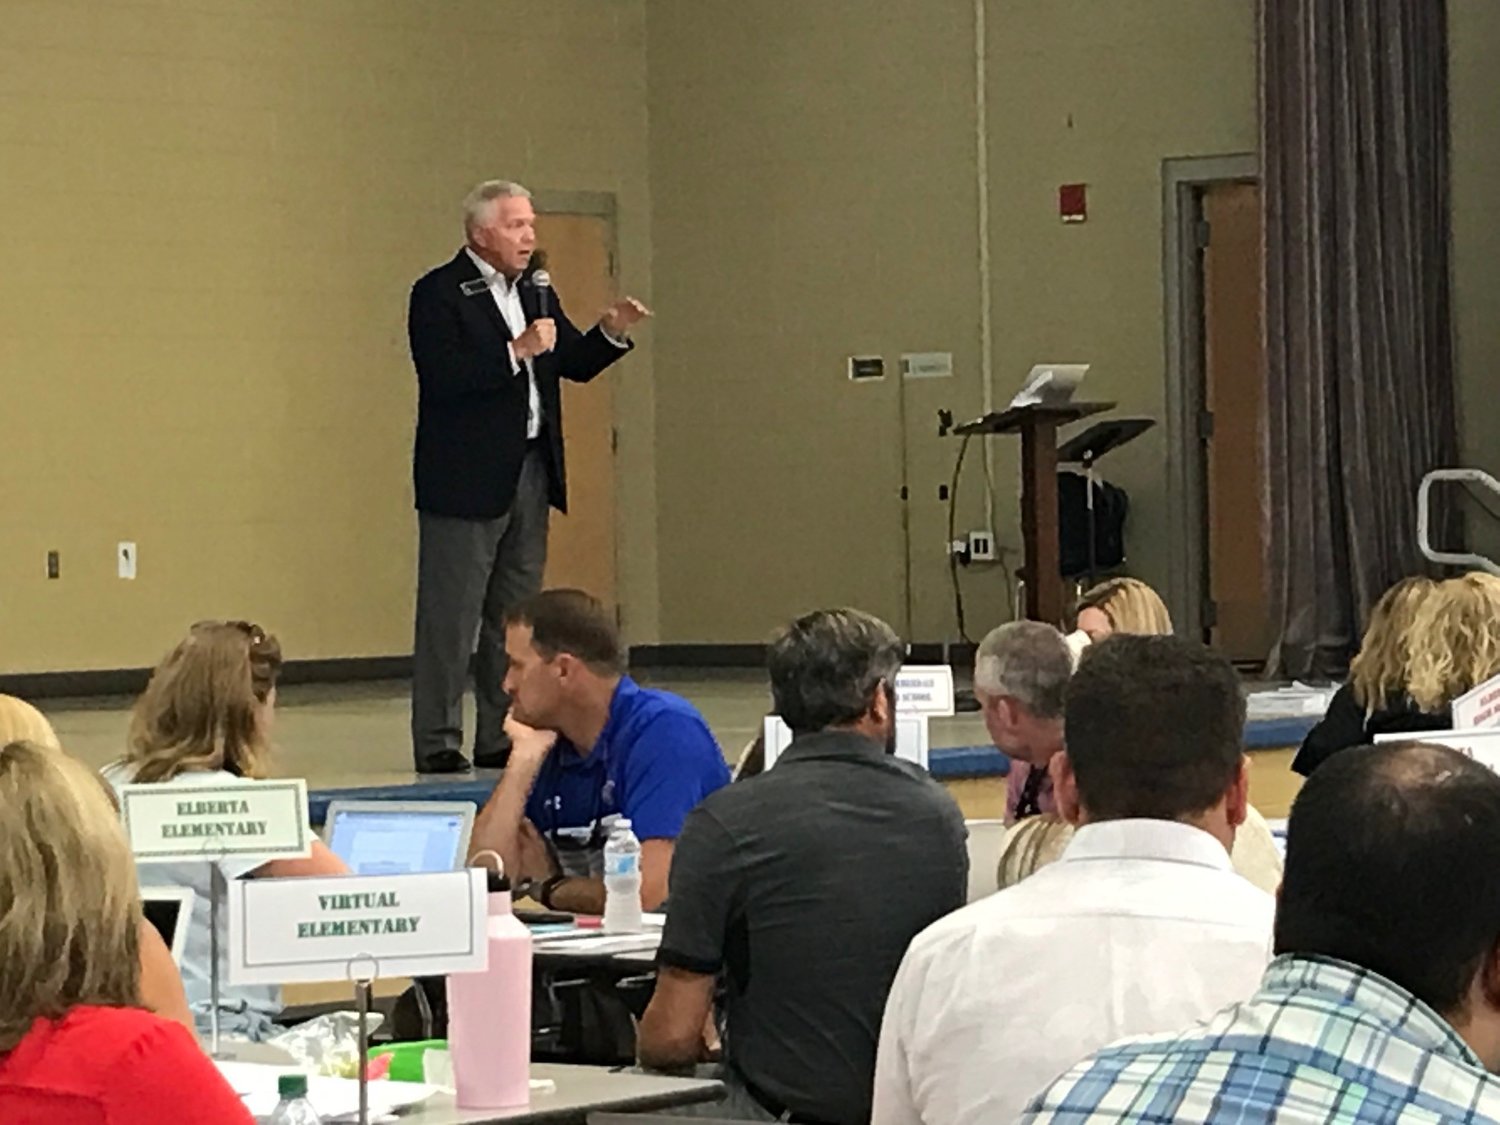 Eddie Tyler, Baldwin County superintendent of education, speaks to school system administrators at Fairhope Middle School on July 22. Tyler said schools will reopen Aug. 11 without mask requirements.